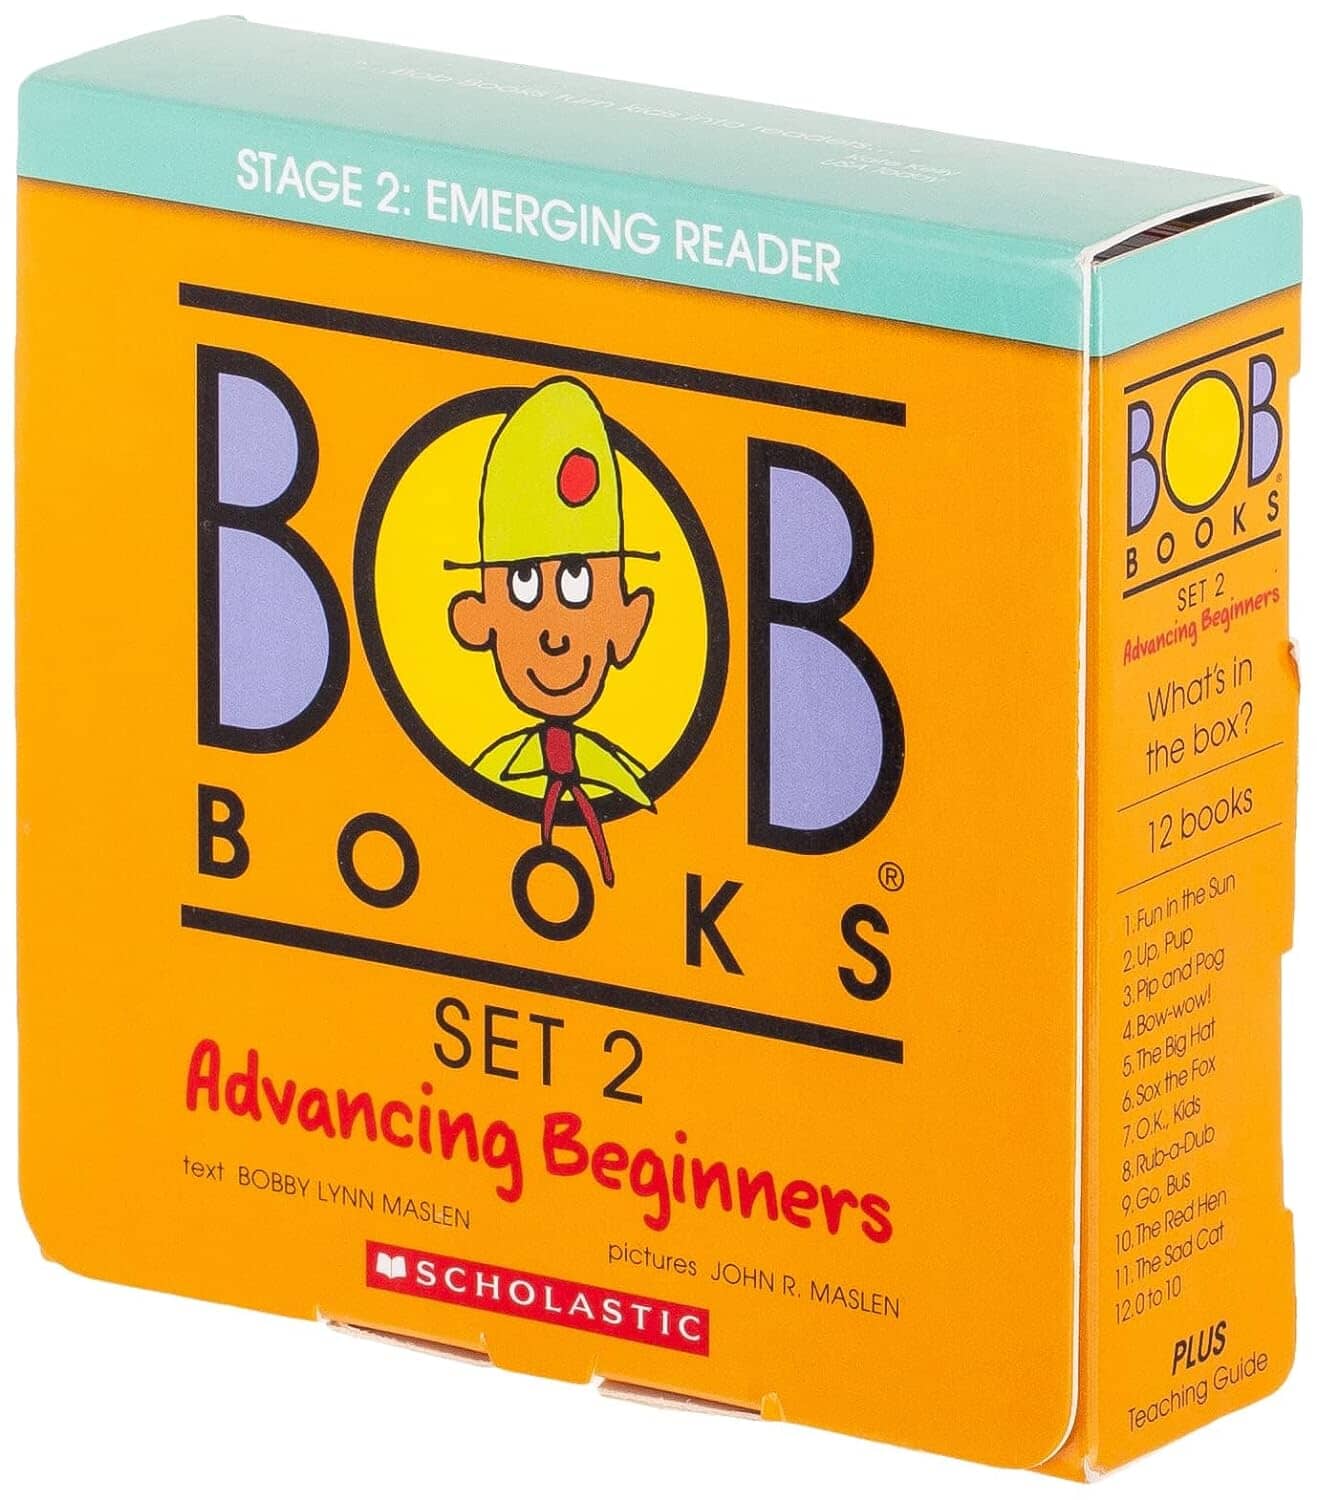 Bob Books Set 2: Advancing Beginners (Stage 2: Emerging Reader) 12 Books Collection Set - Ages 4+ - Paperback Scholastic